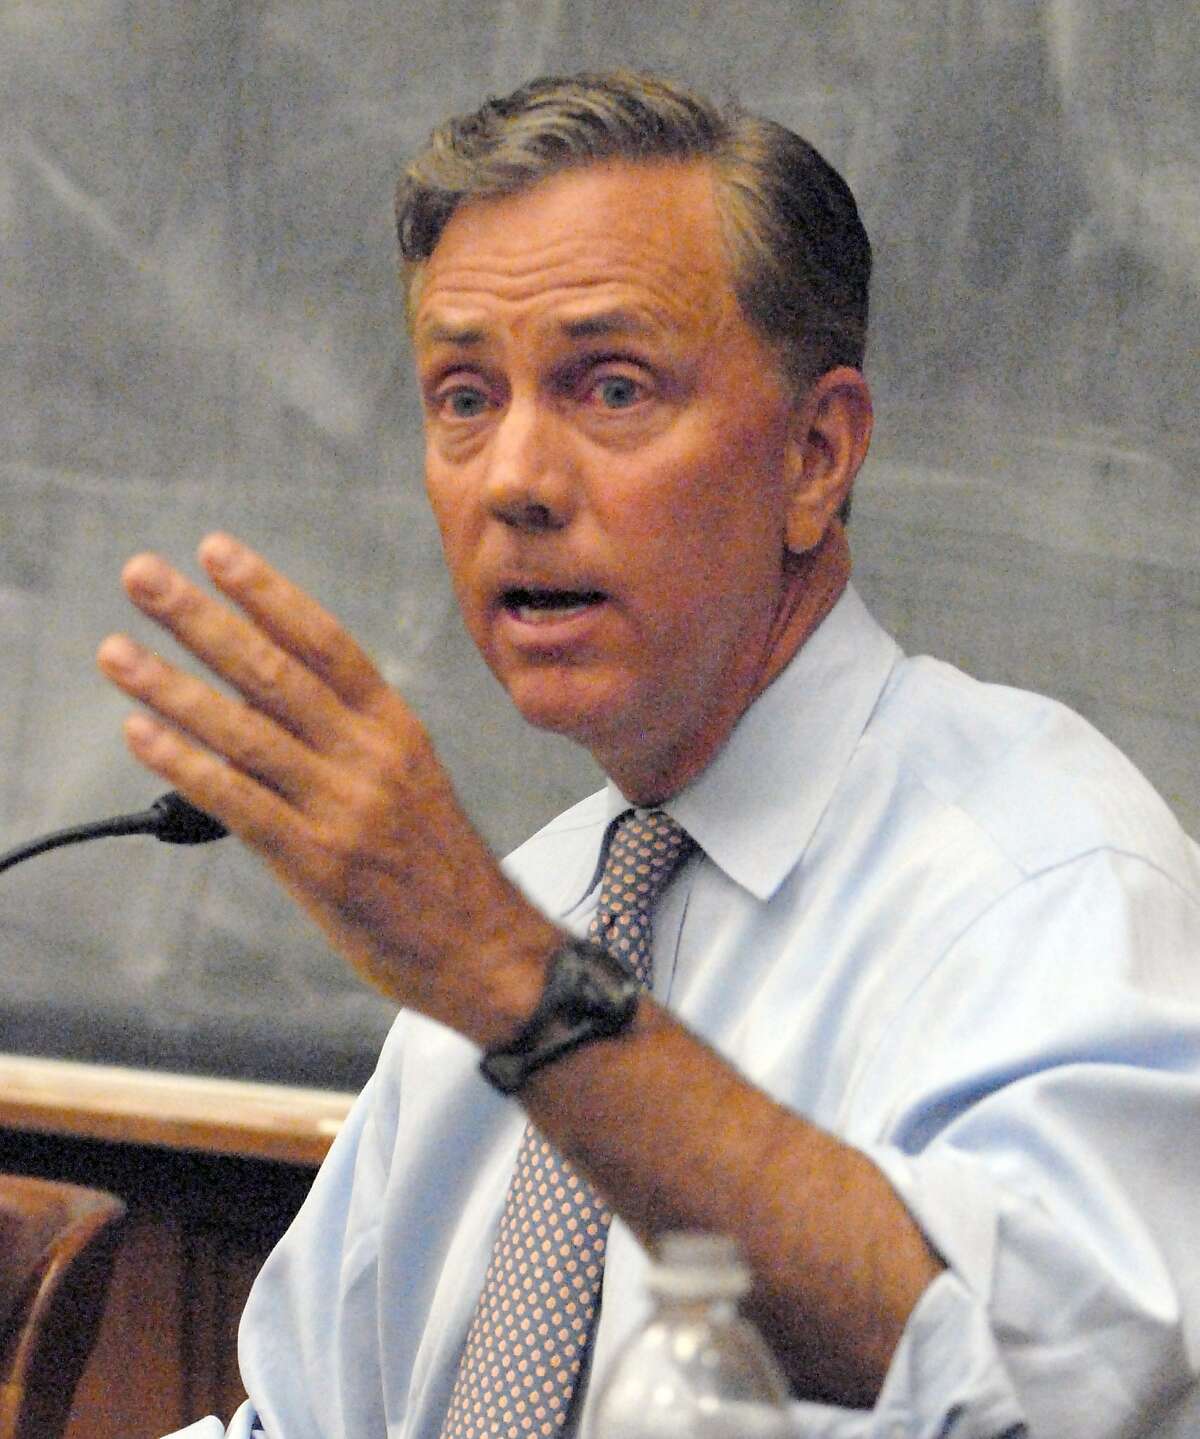 Democrats including Gov. Ned Lamont are preparing to replace most of the state income tax with a payroll tax, a new scheme to raise cash for the state that would mark the most radical change in Connecticut finances since the income tax started 28 years ago.